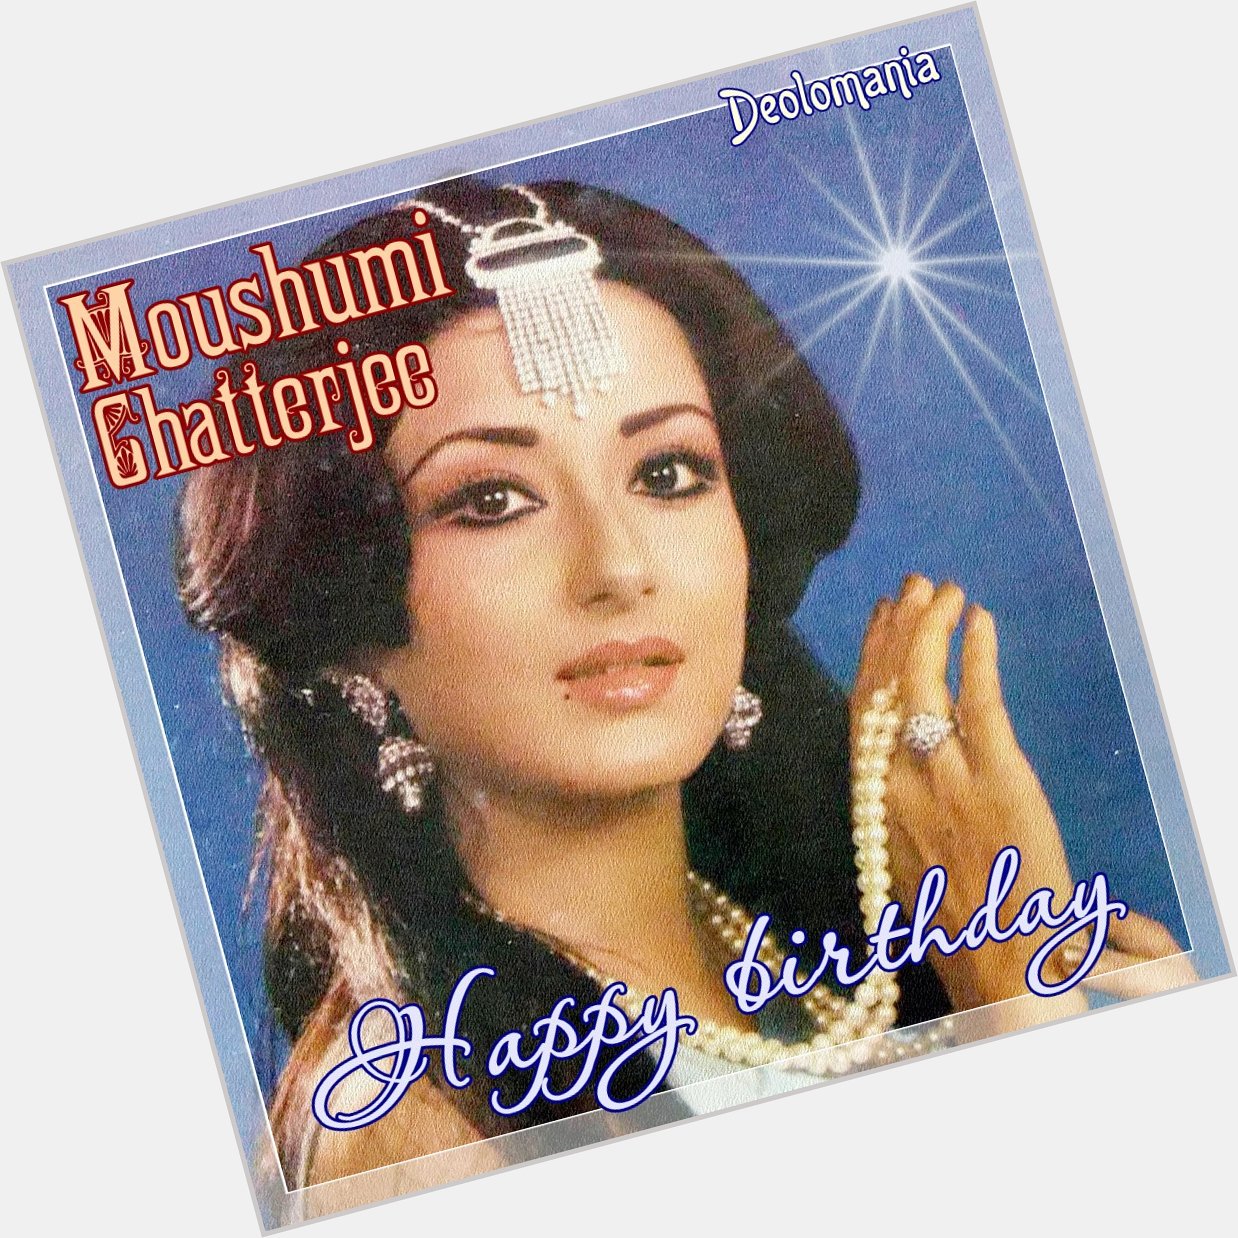  Wishing a very happy birthday to wonderful Moushumi Chatterjee    